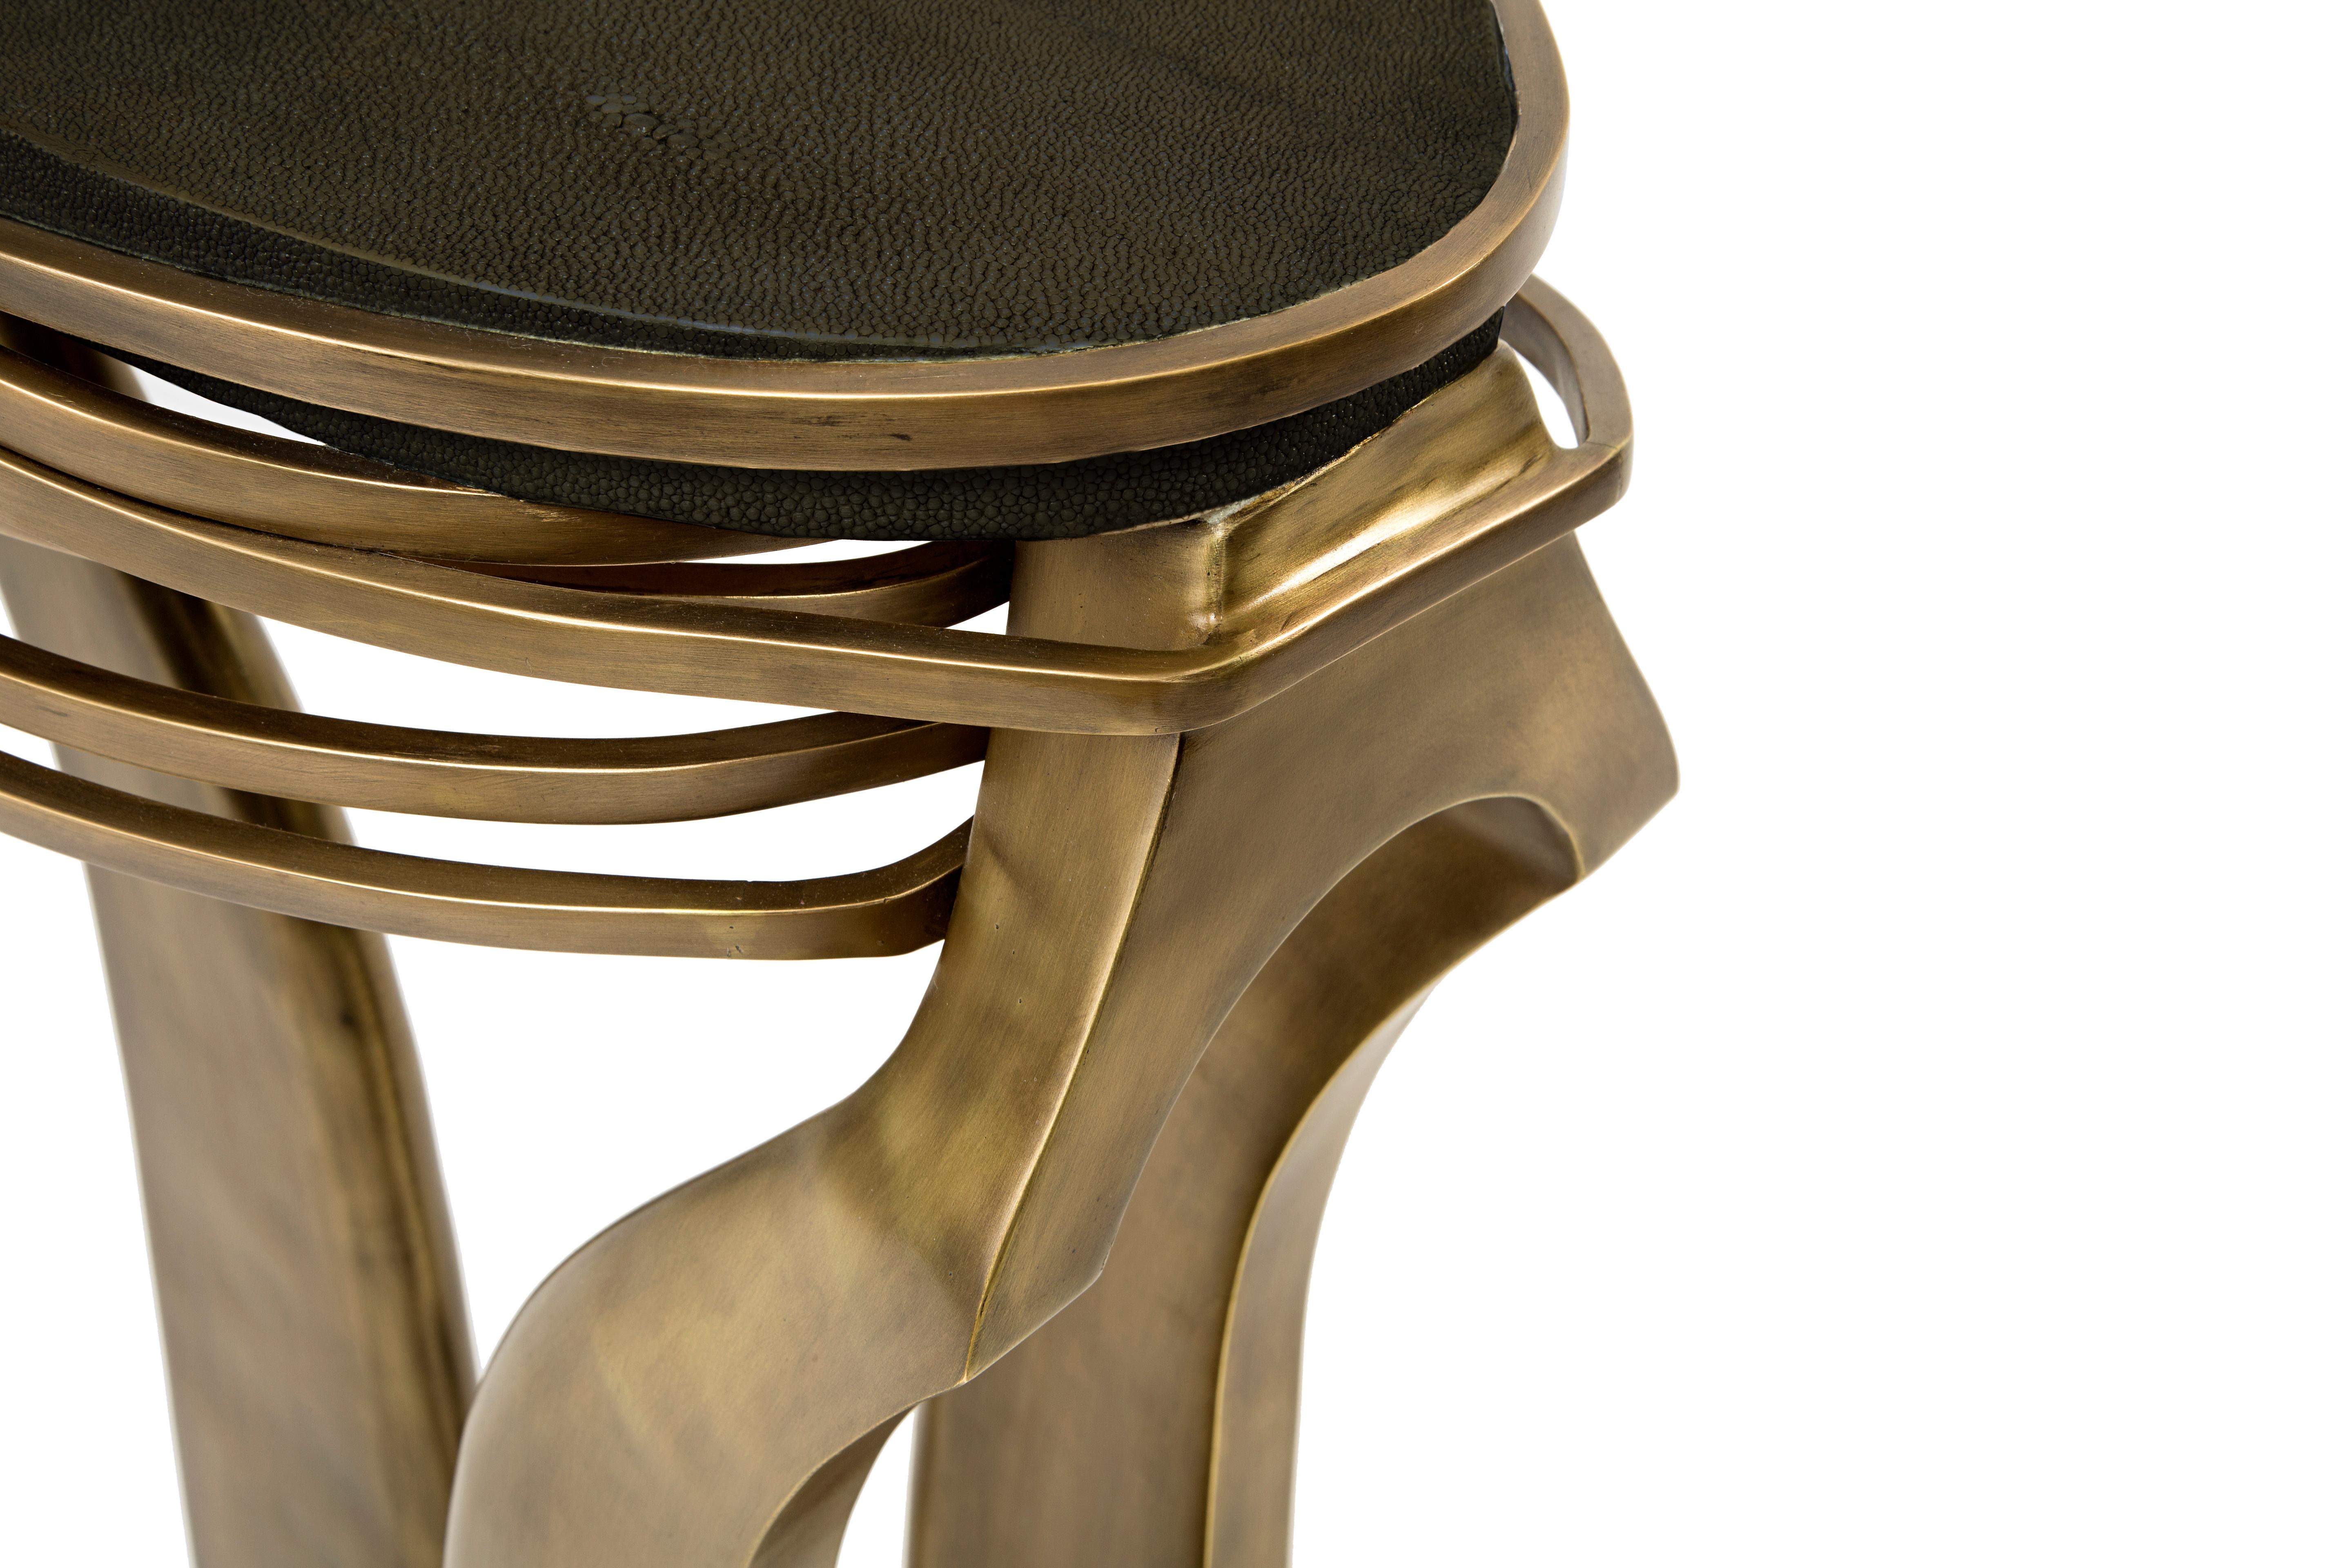 The galaxy side table in small is an iconic Kifu Paris piece. Whimsical, sculptural and bold this piece makes the ultimate accent piece in any space. The intricate bronze-patina brass rings encircle the black shagreen amorphous-shaped inlaid top.